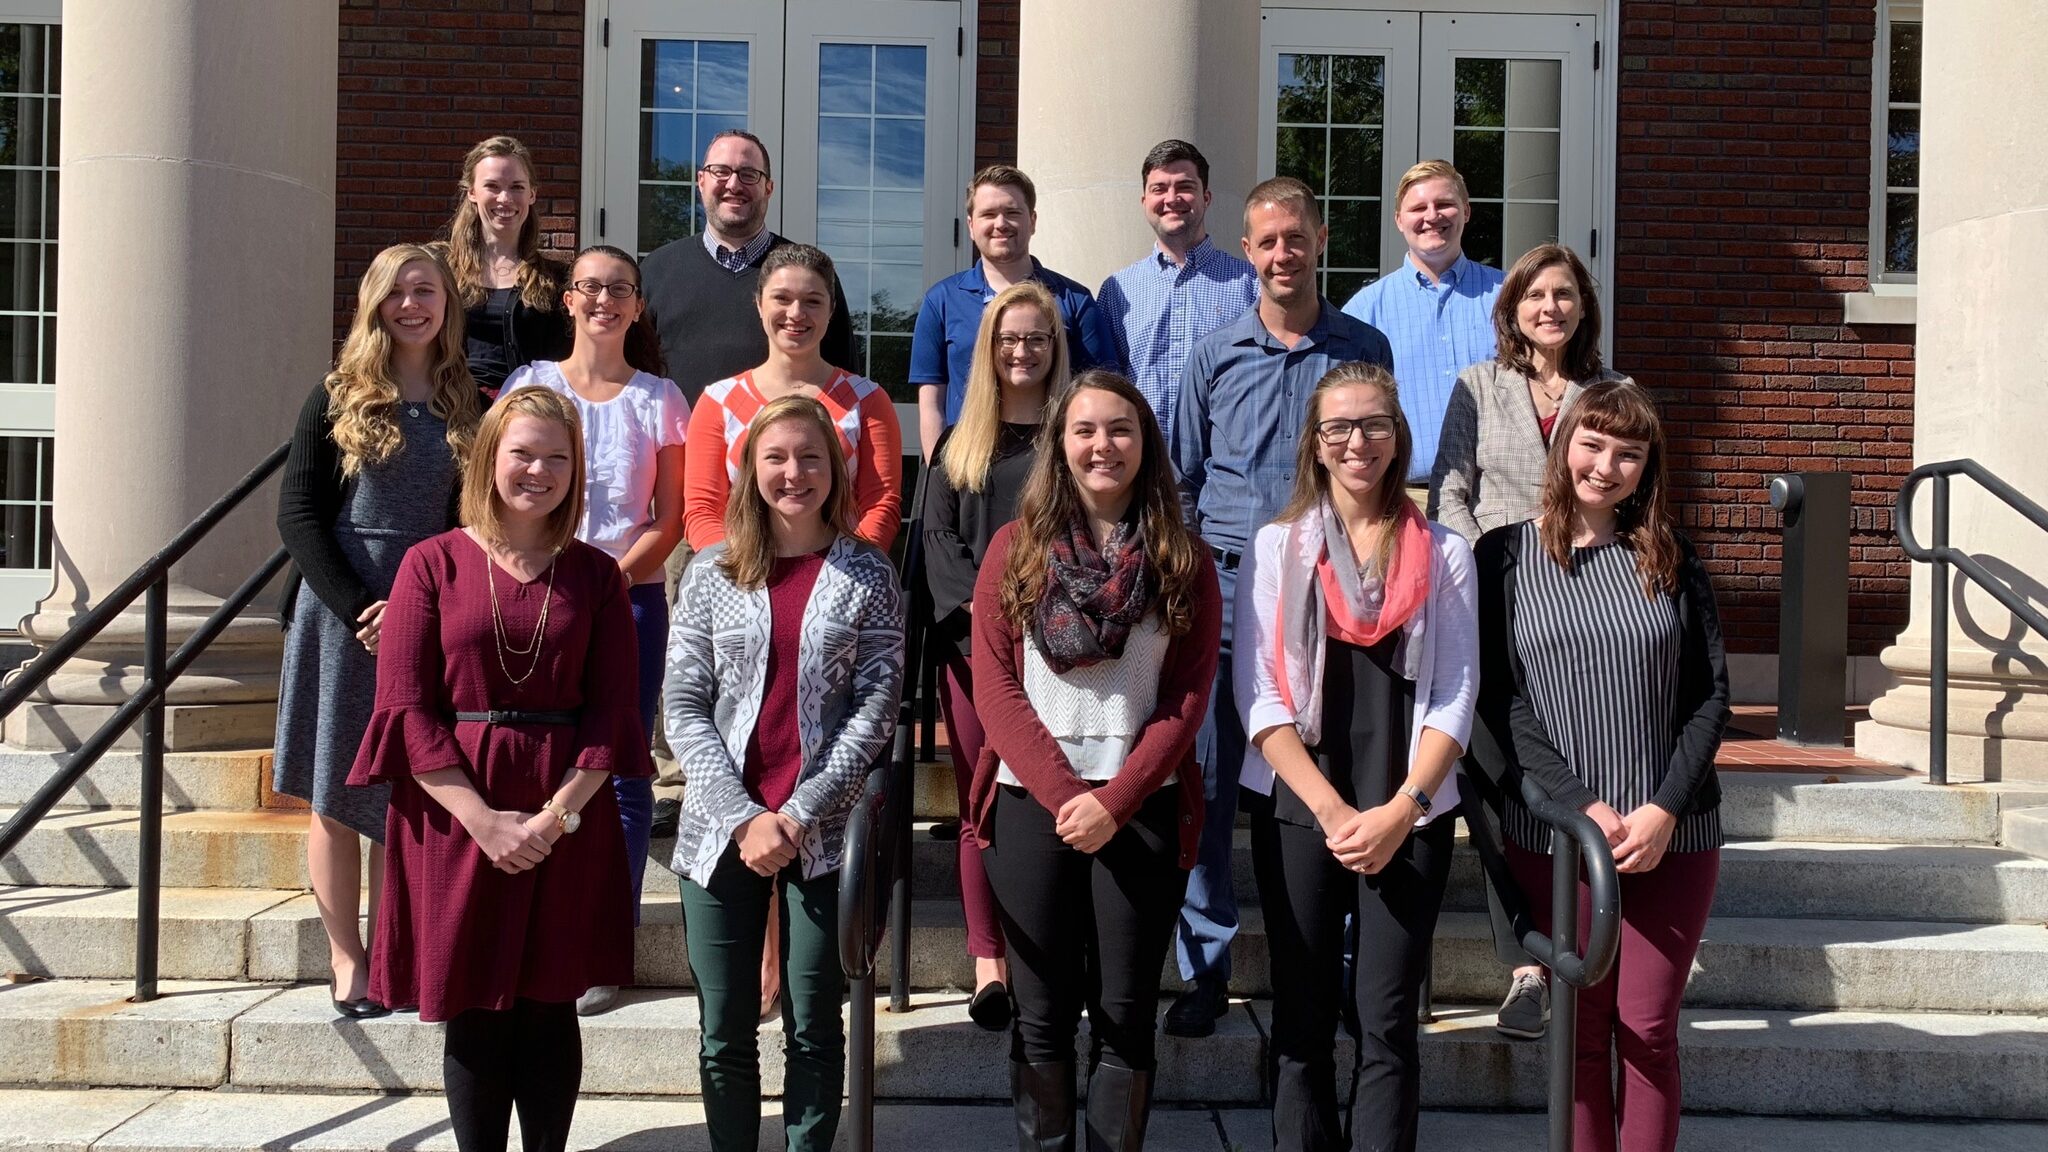 Genetic counseling students, classes of 2018 and 2019